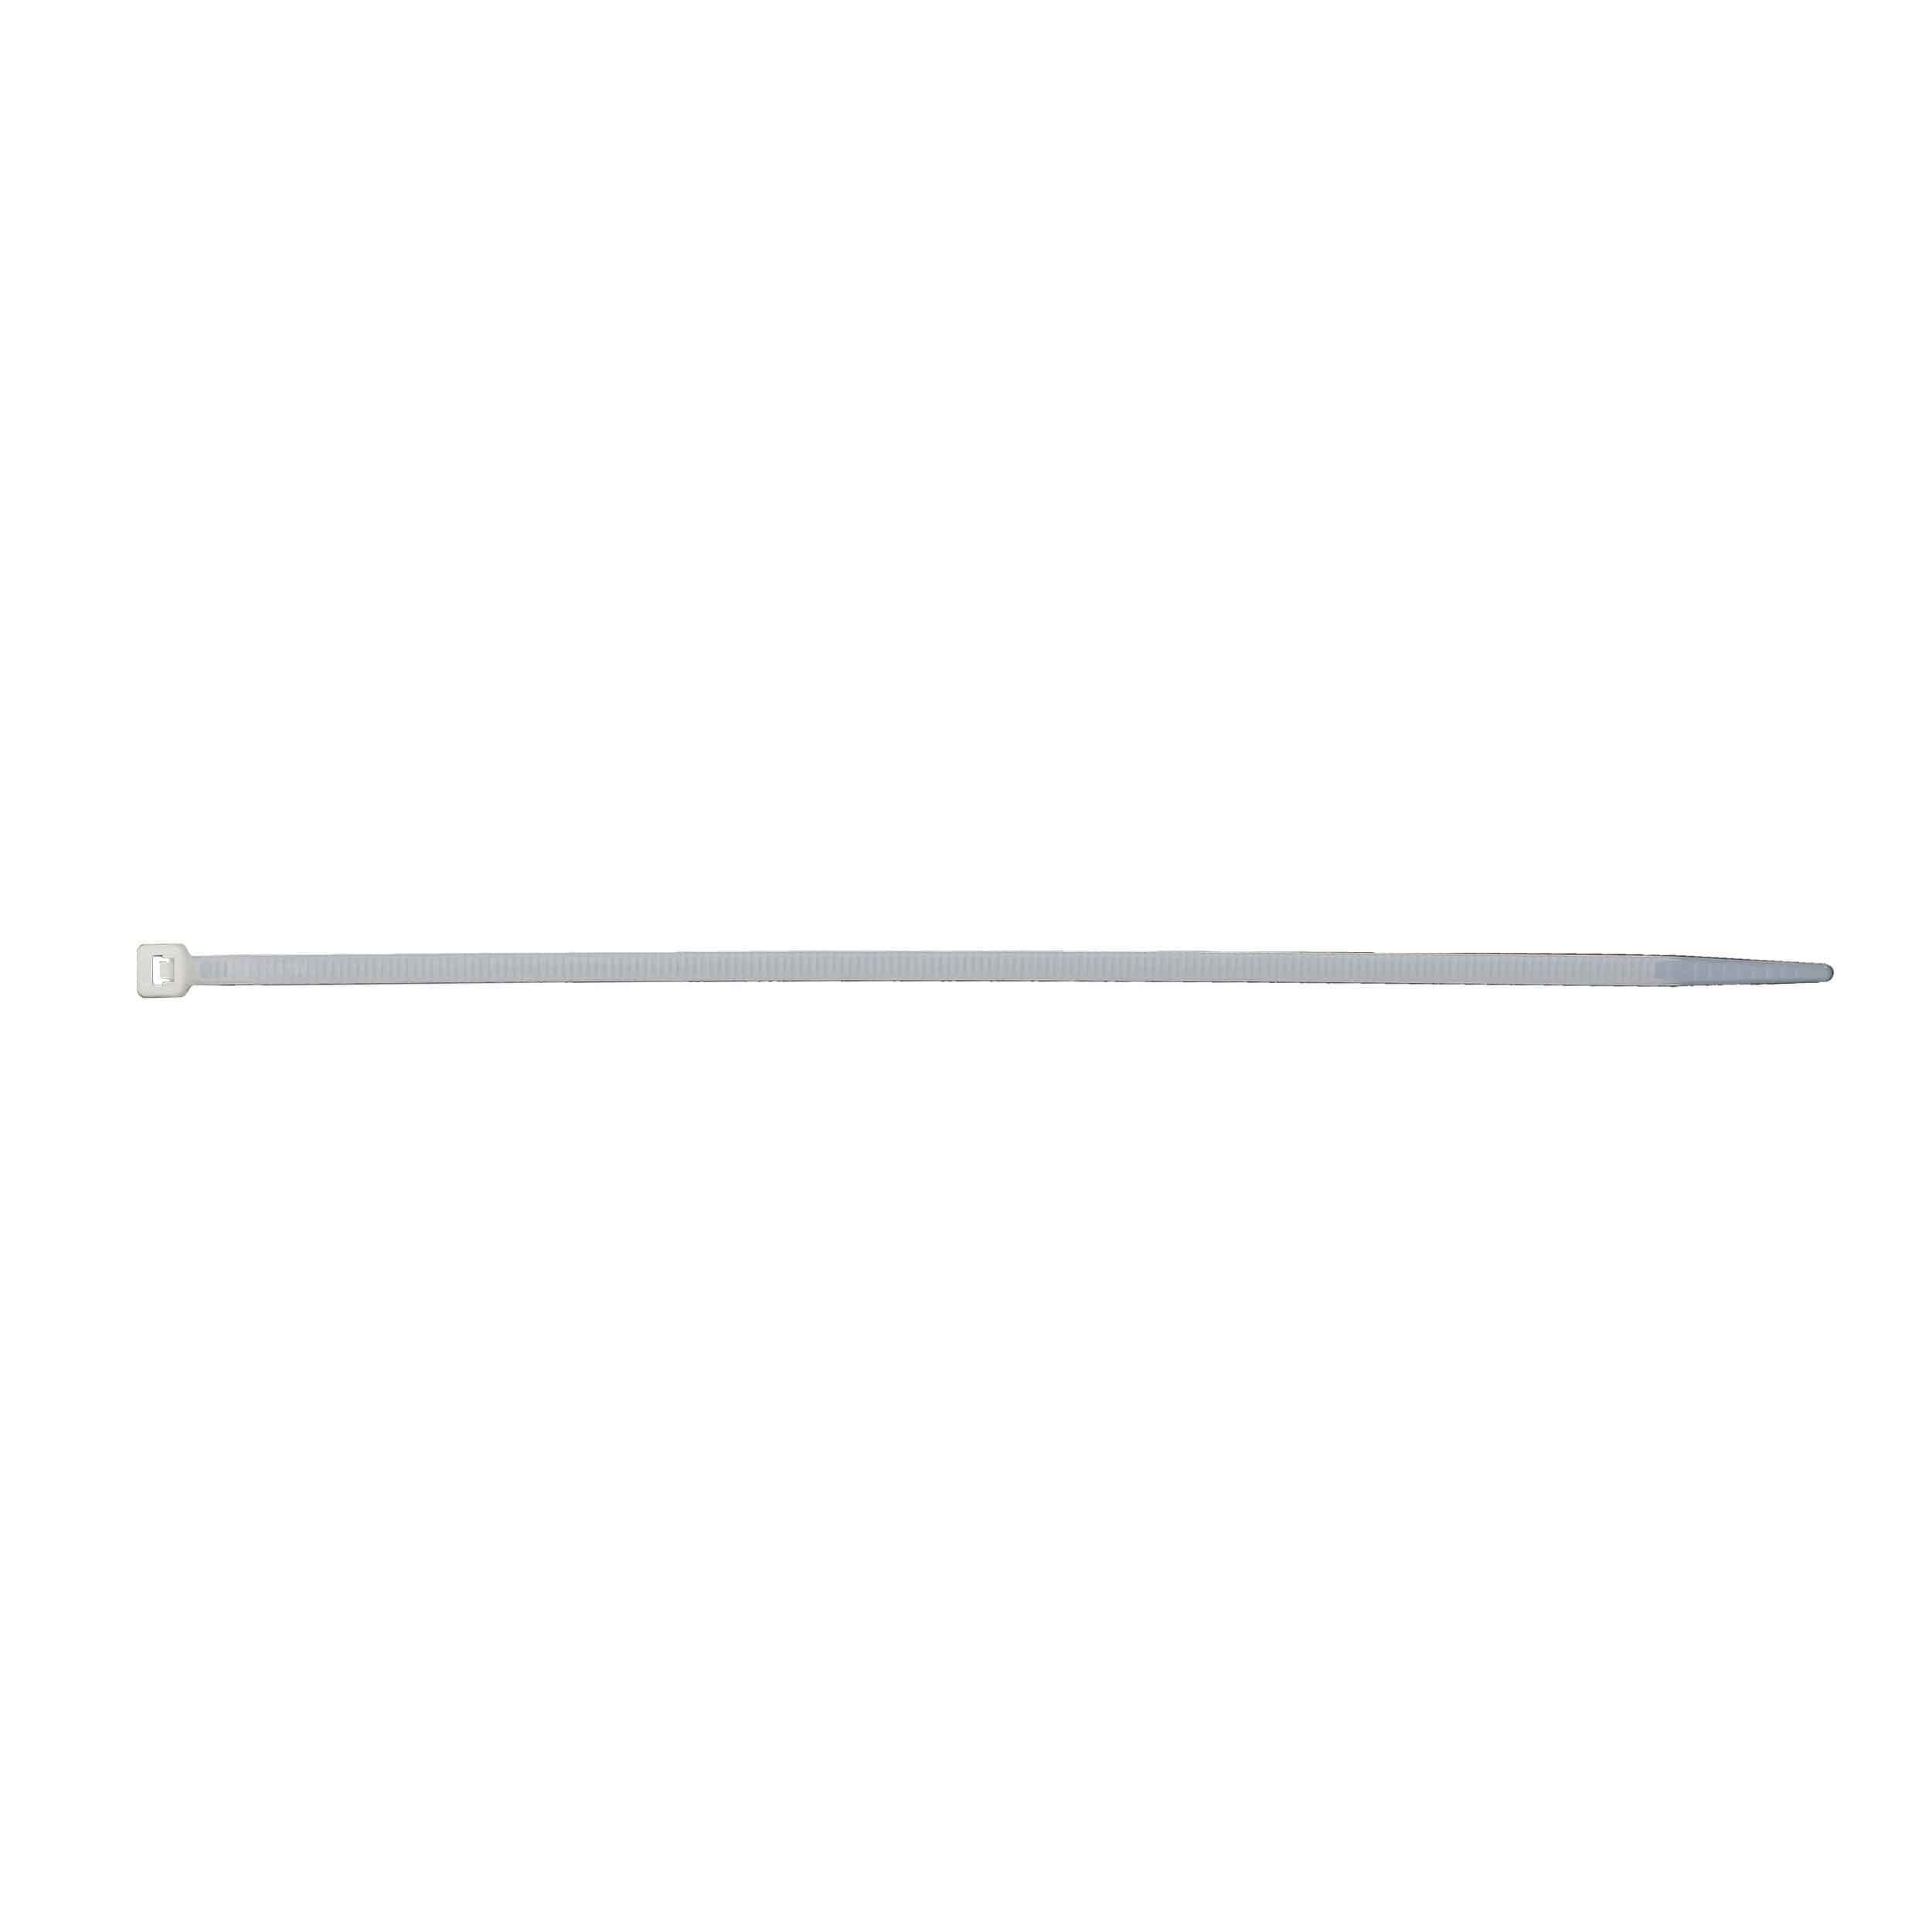 Cable Tie Natural 8in 40lb - Package of 1000